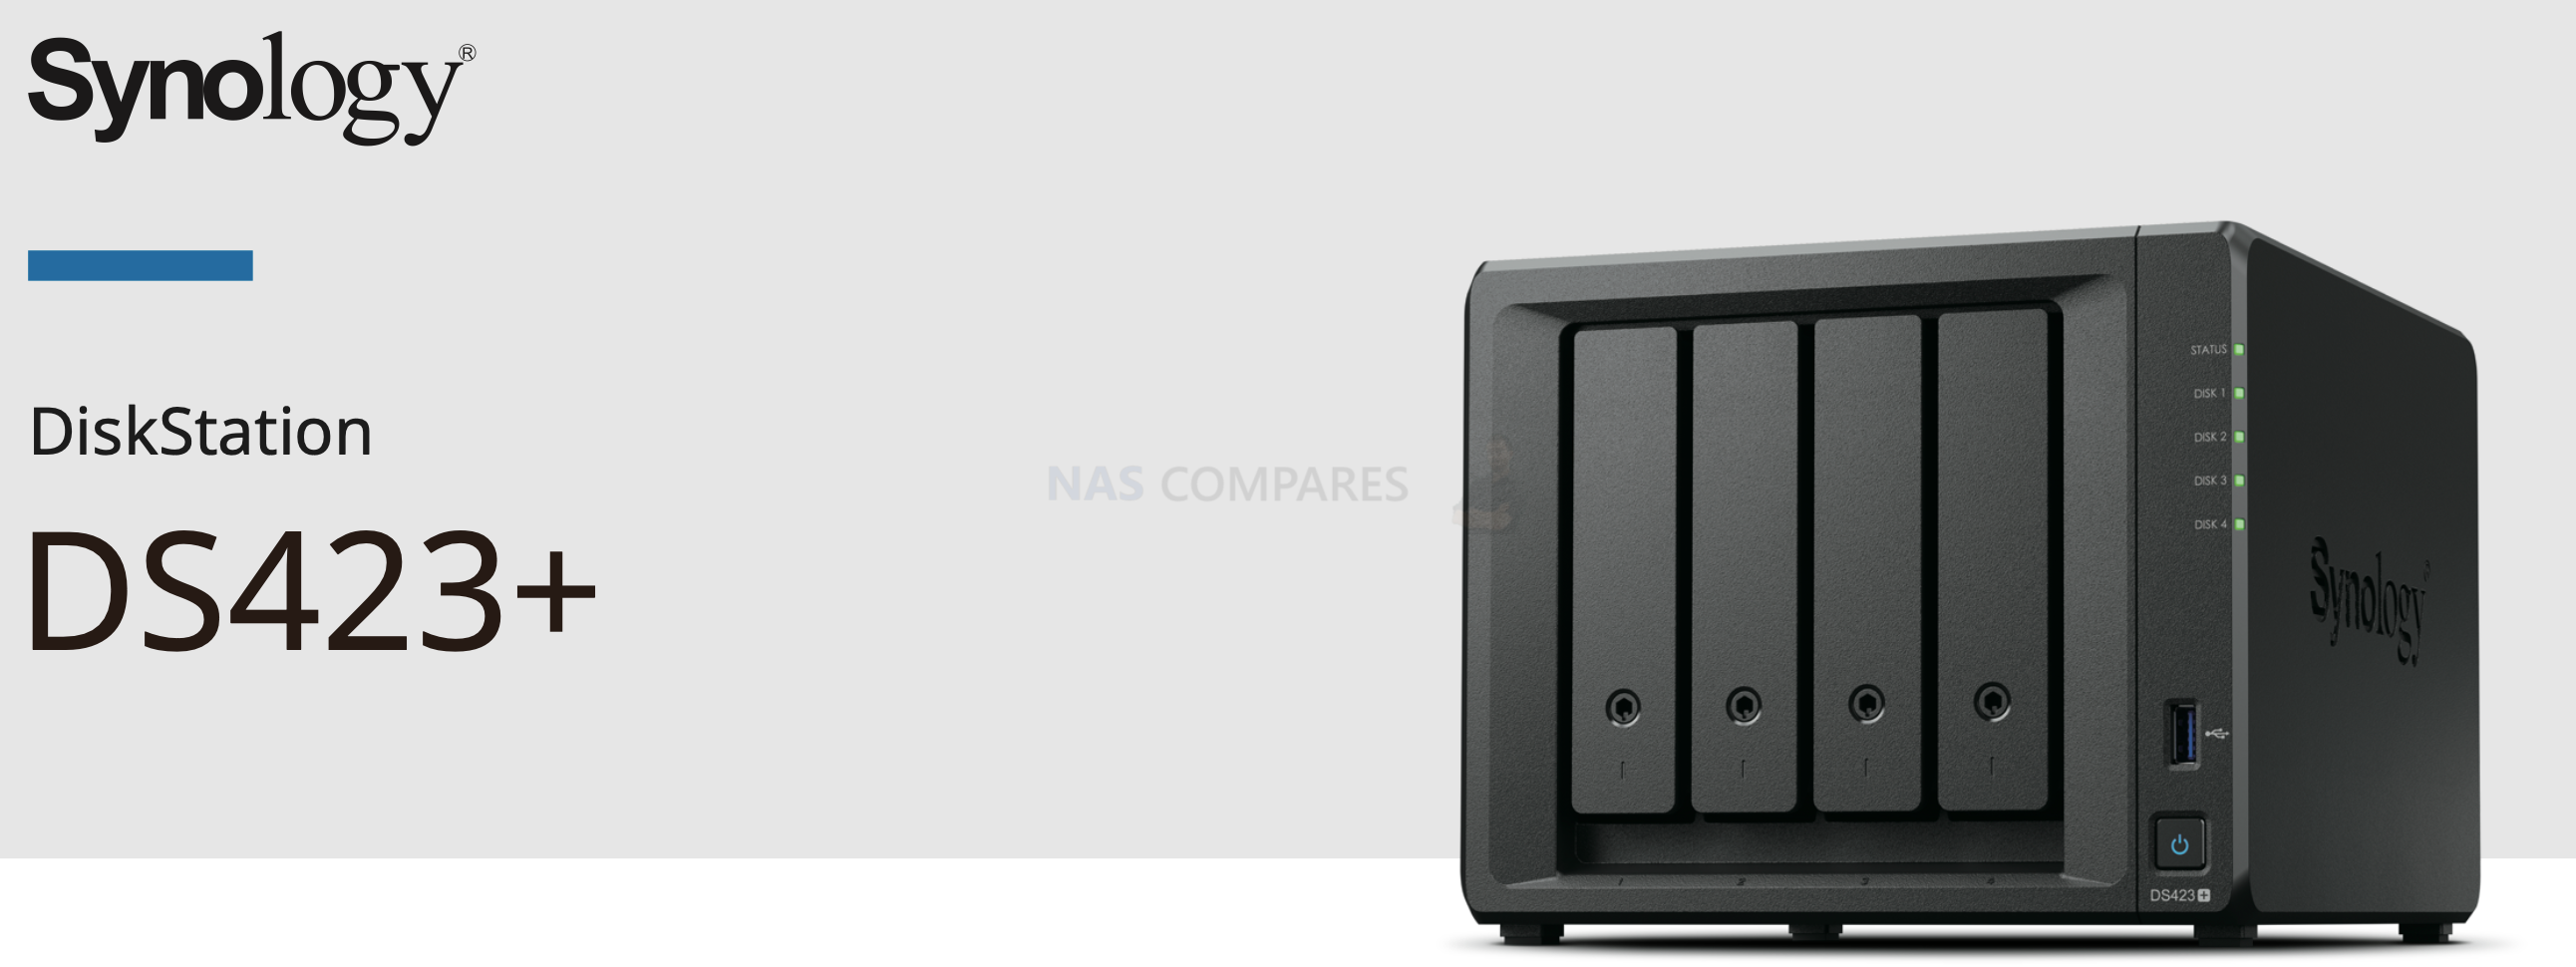 NAS Compares - Synology DS423+ NAS Confirmed and Coming Soon